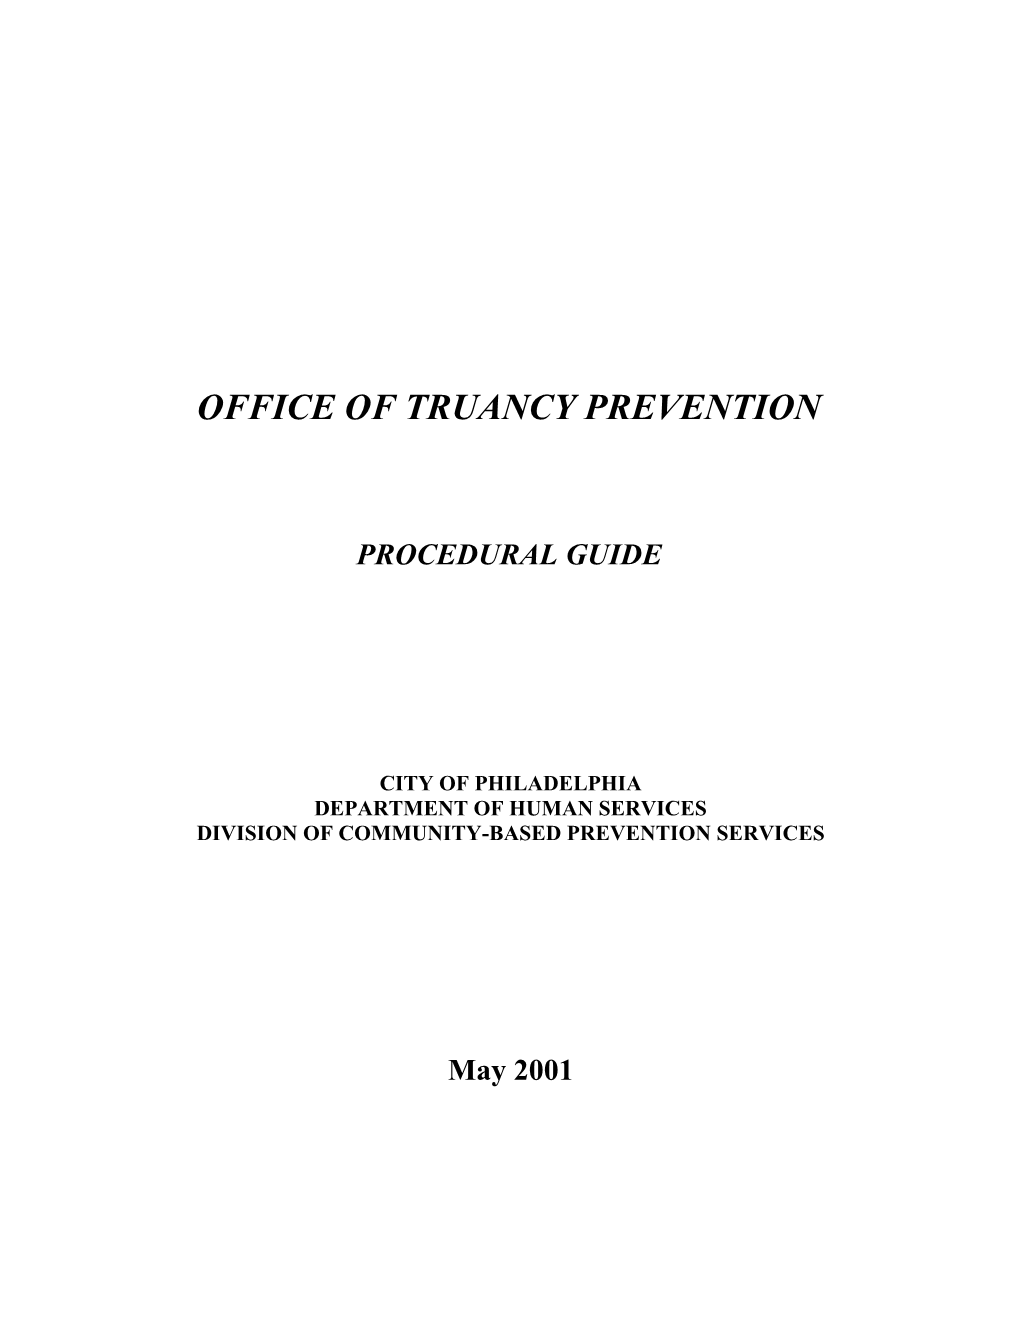 Office of Truancy Prevention